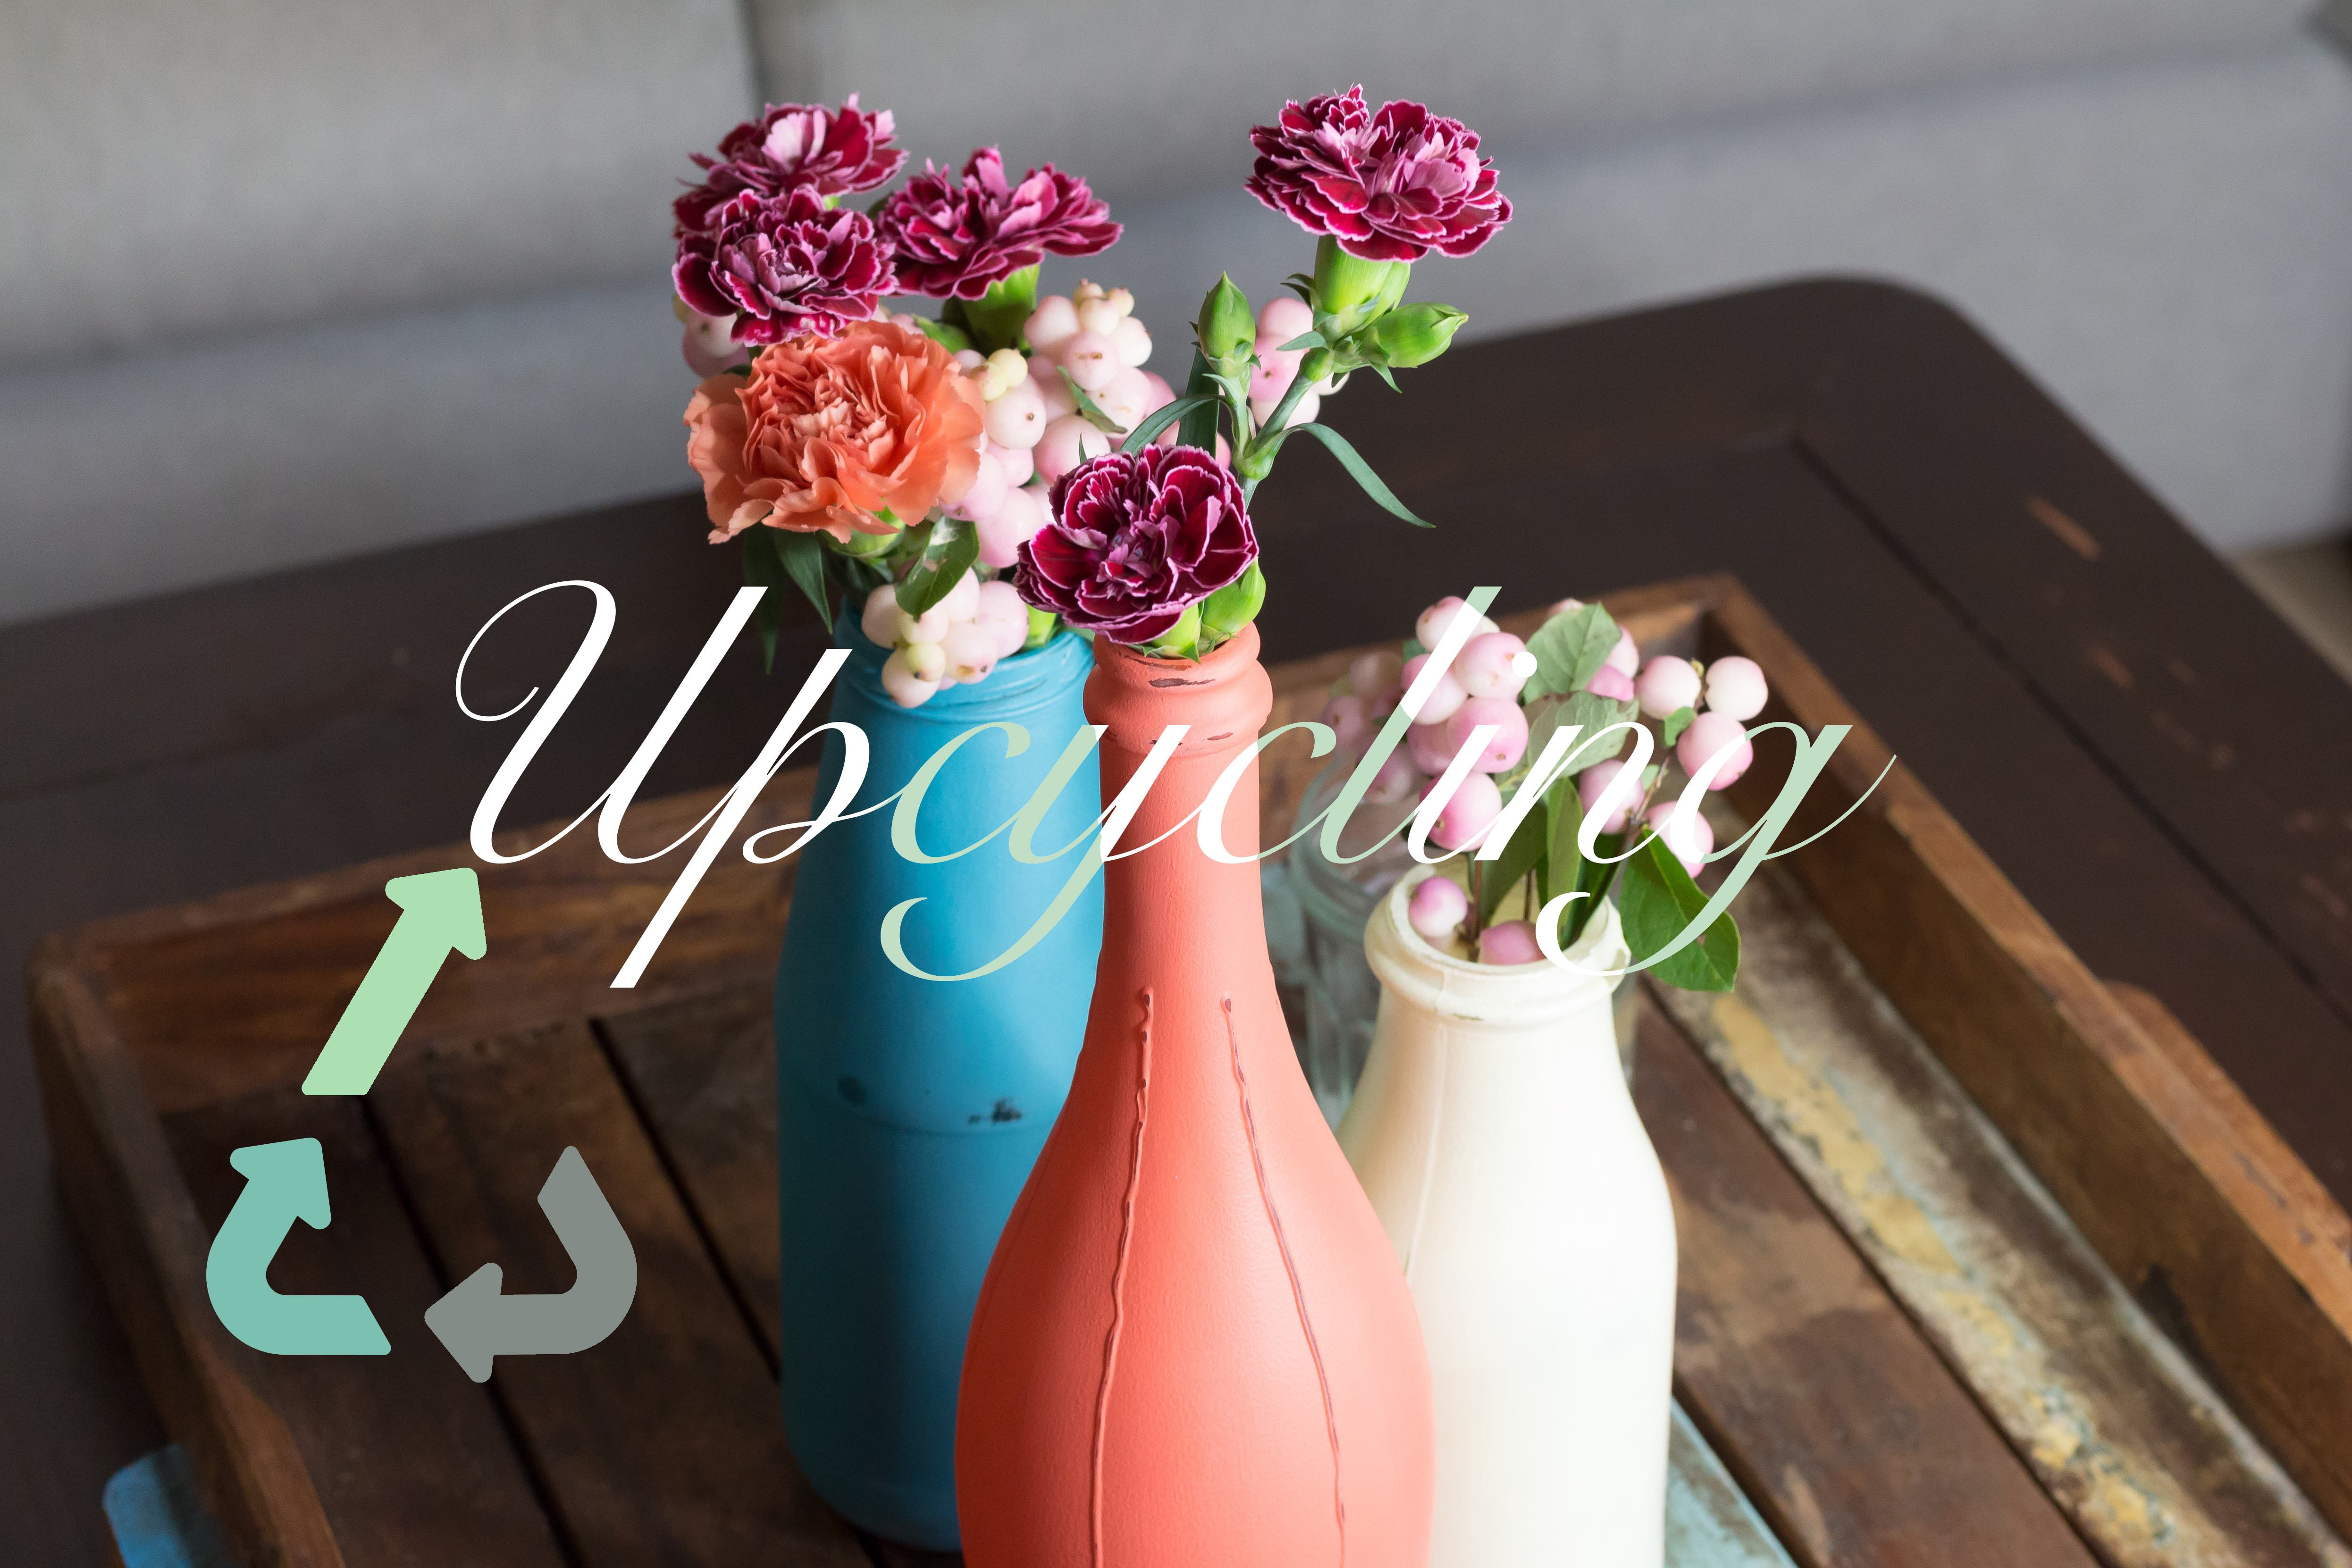 Chalk Paint Vase with flowers and the word Upcycling on it